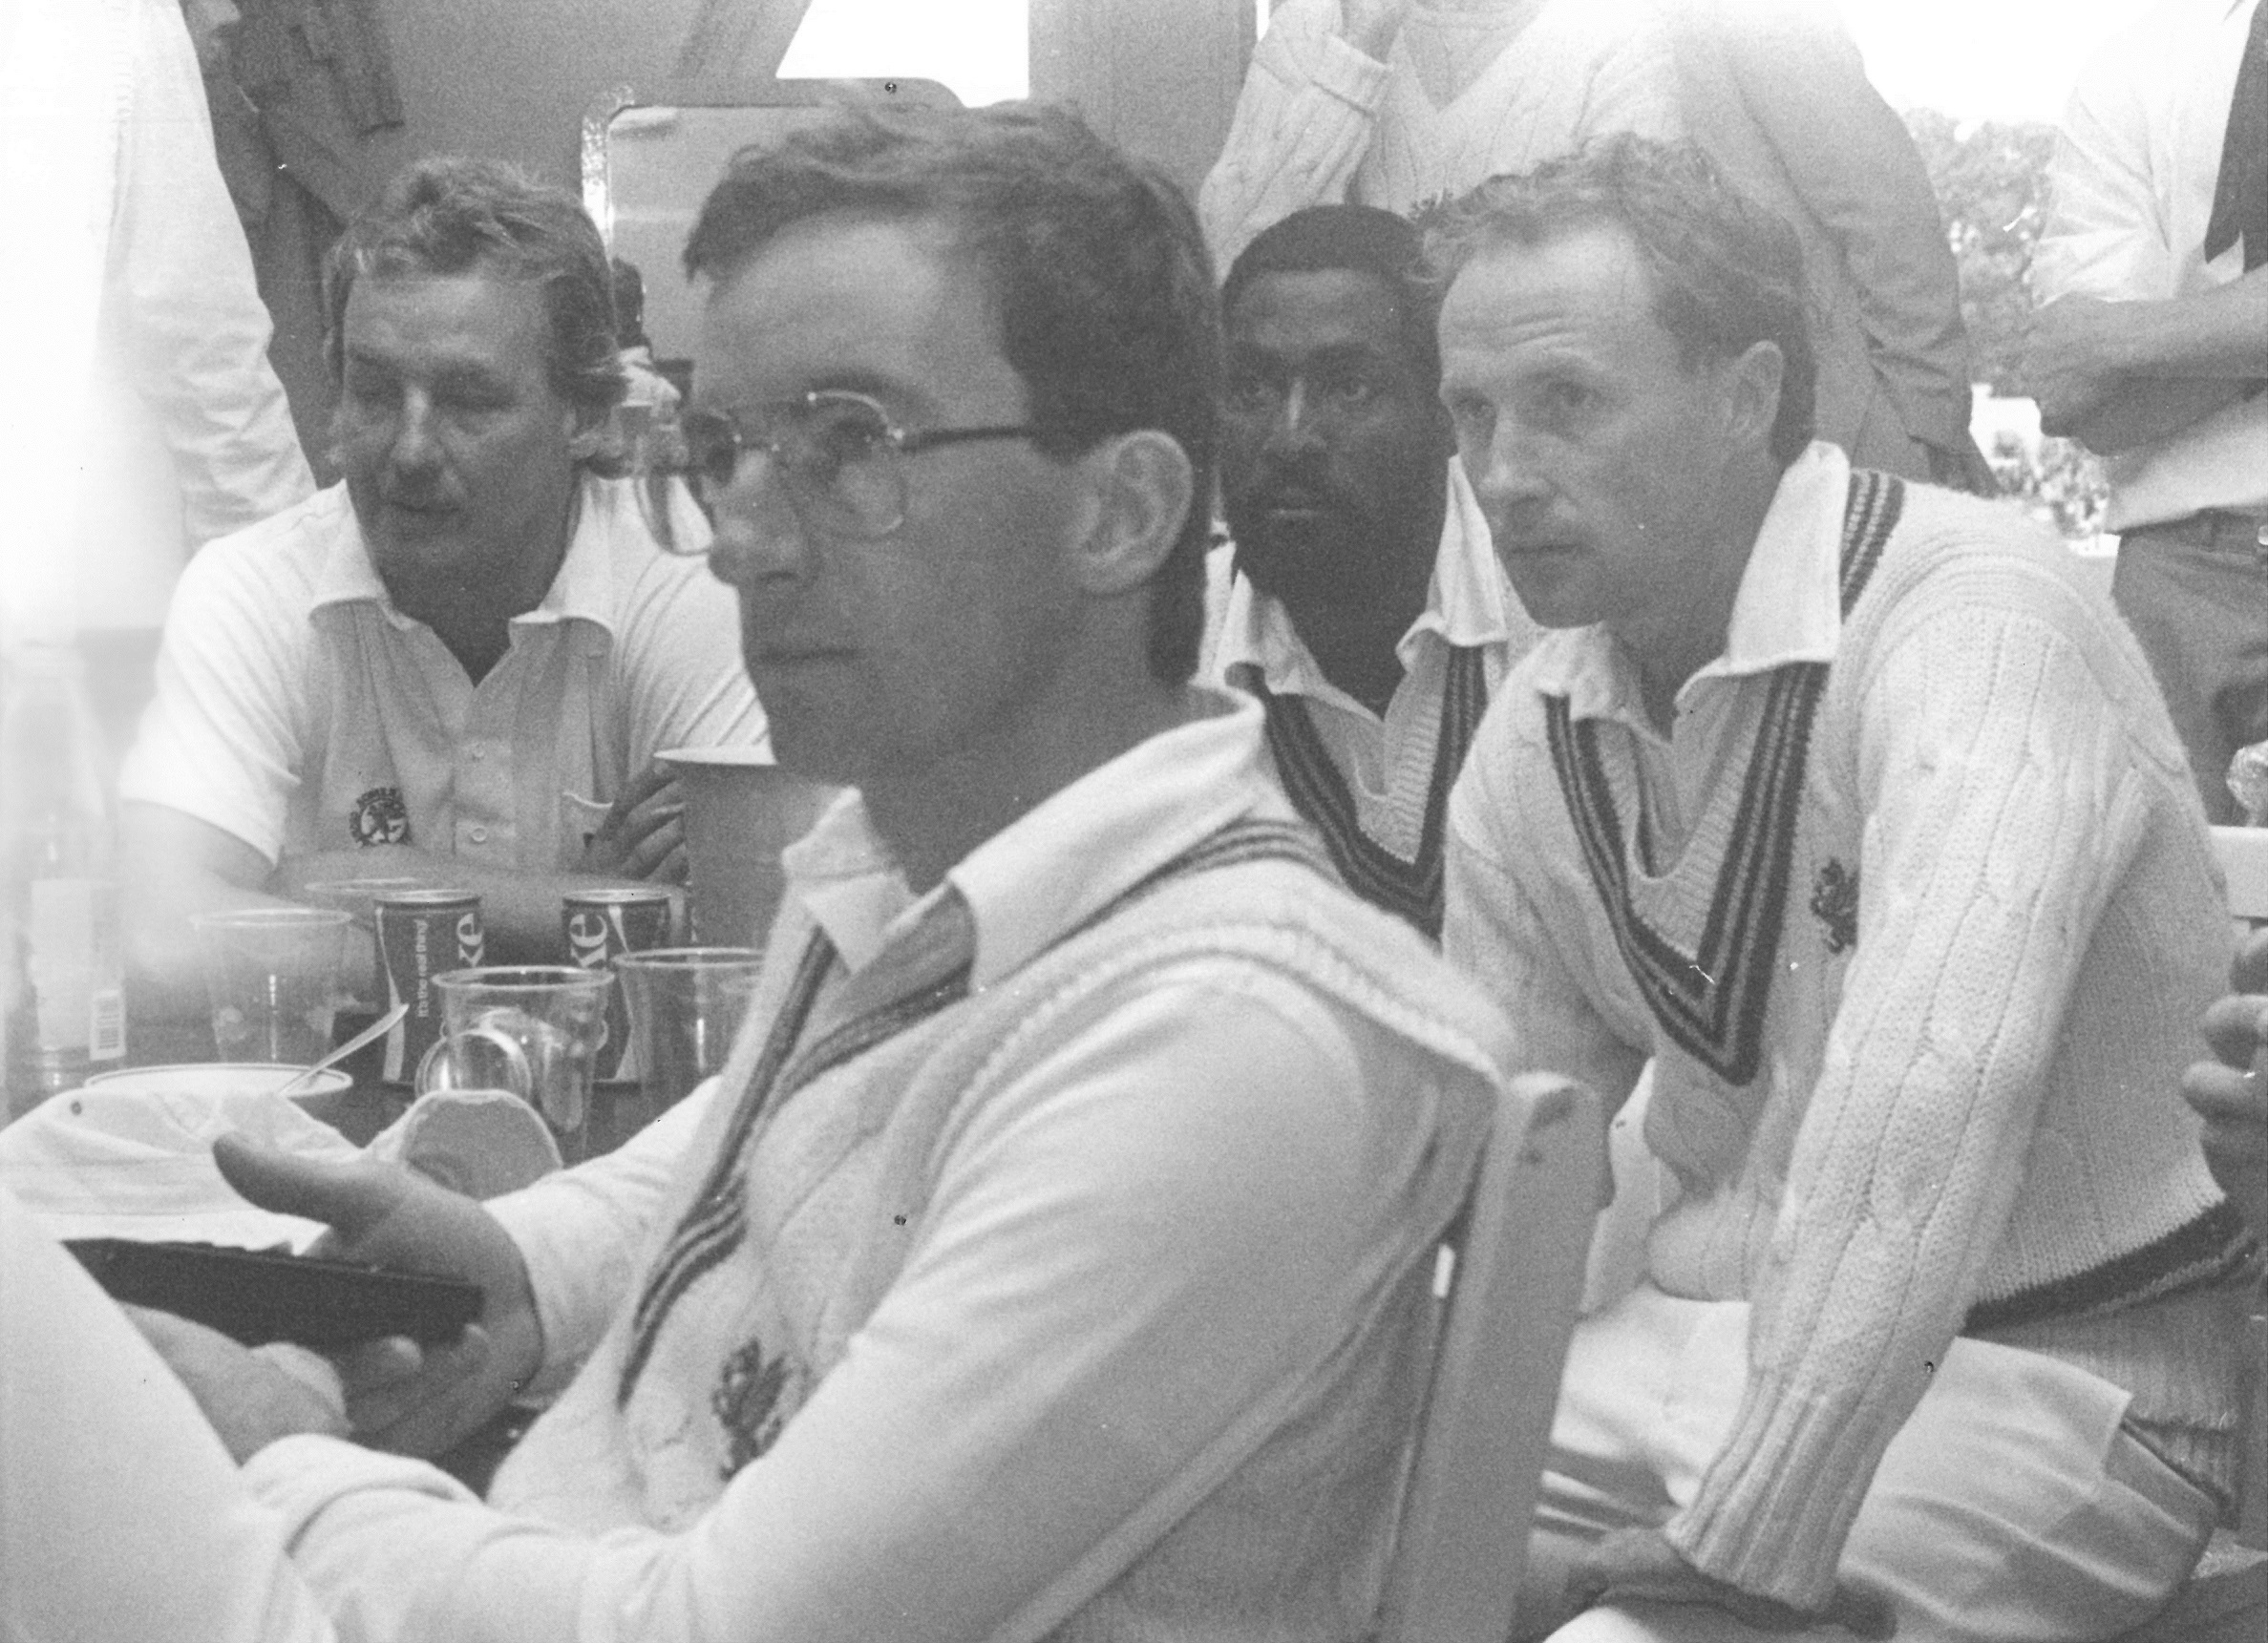 Peter Roebuck (front) and Somerset colleagues at Lord's in 1983